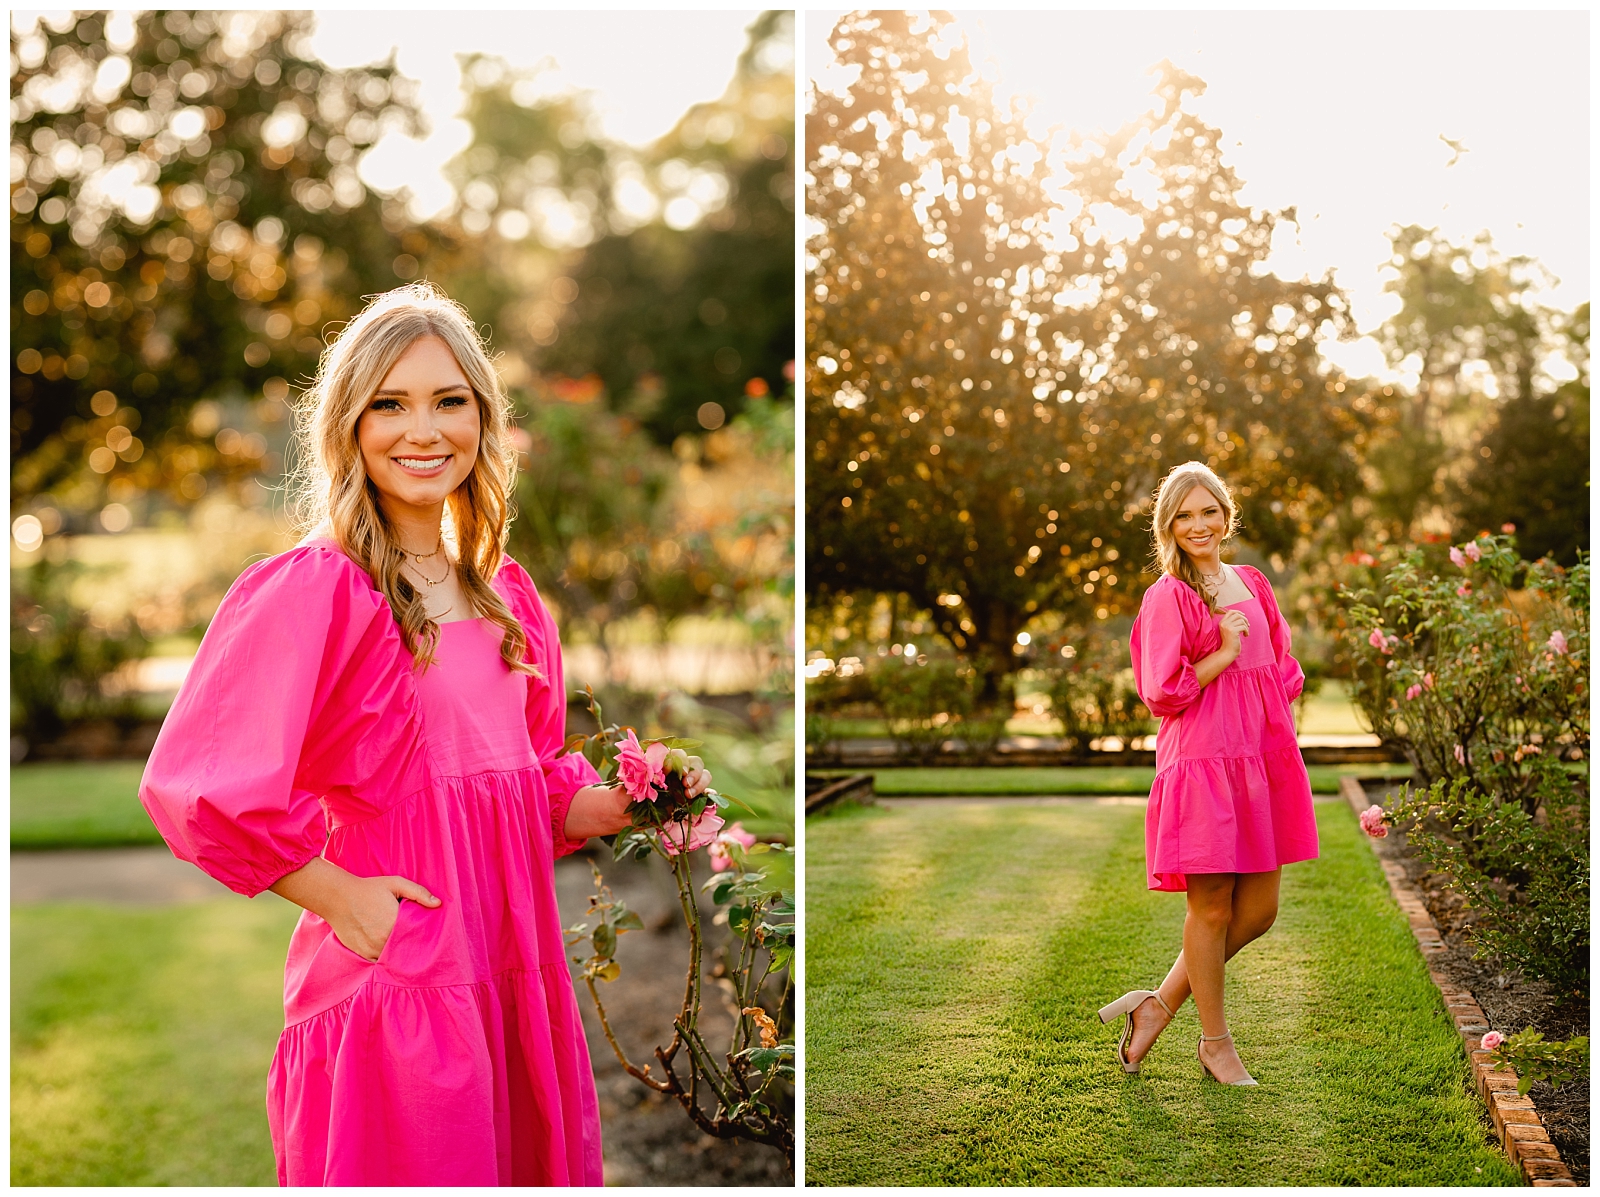 Senior Pictures in Thomasville, Georgia at the Rose Garden during sunset with hot pink dress.